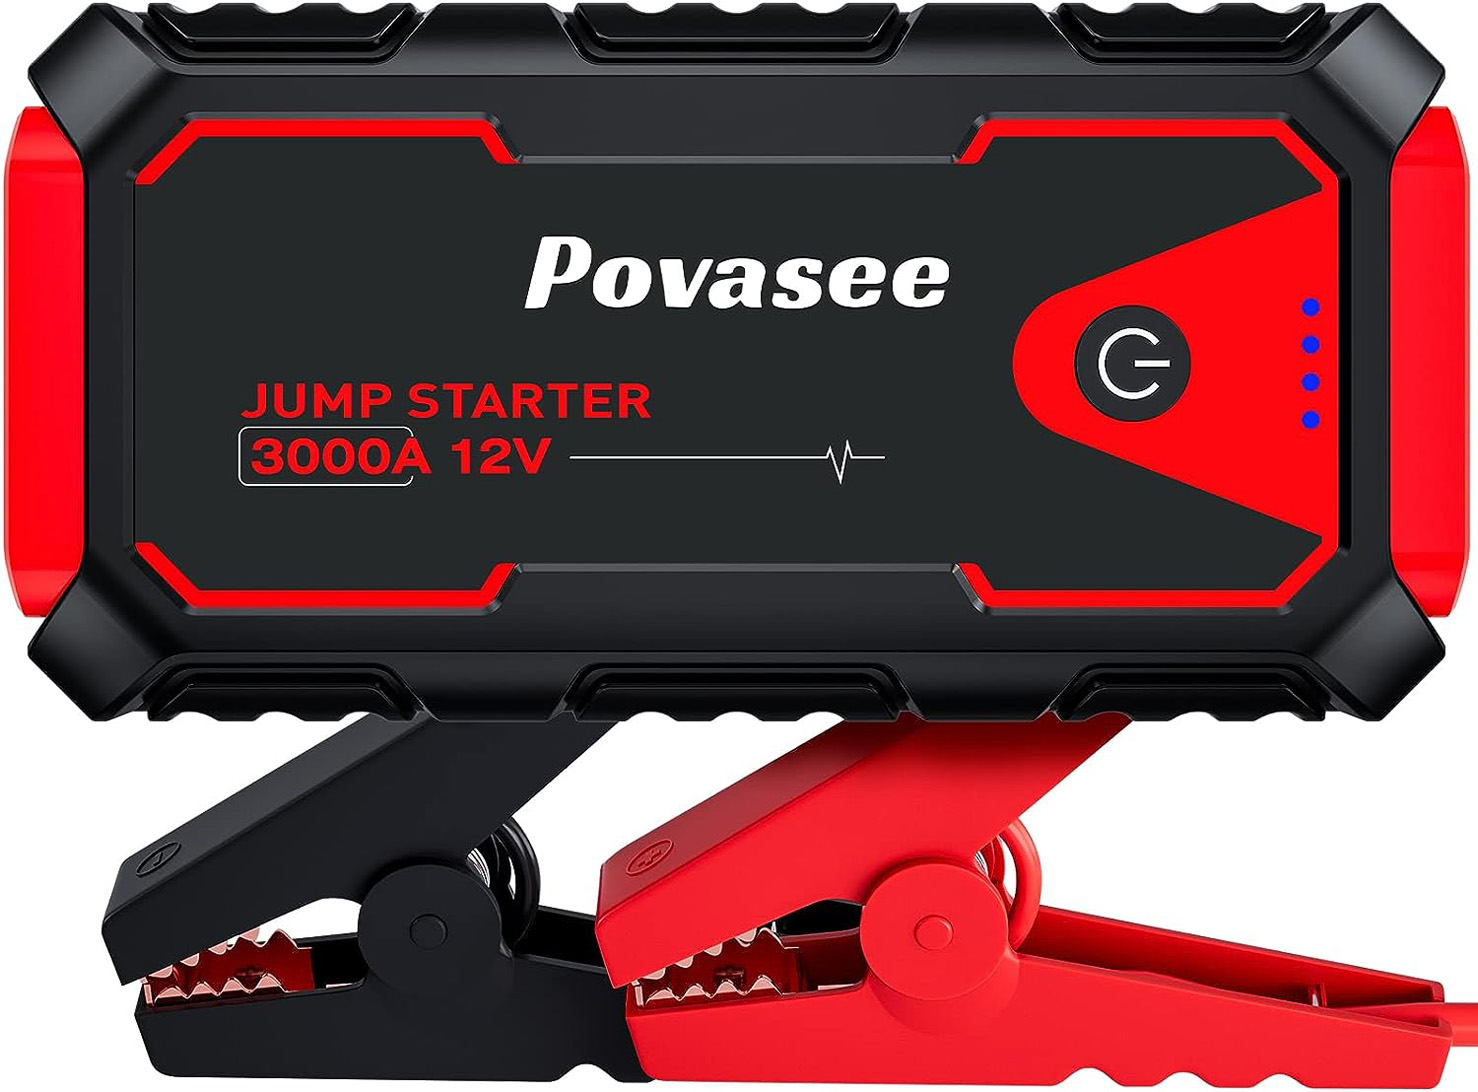 Povasee Jump Starter 3000A Peak Jump Starter Battery Pack, 12V Jump Box for Car Battery up to 10L Gas or 8L